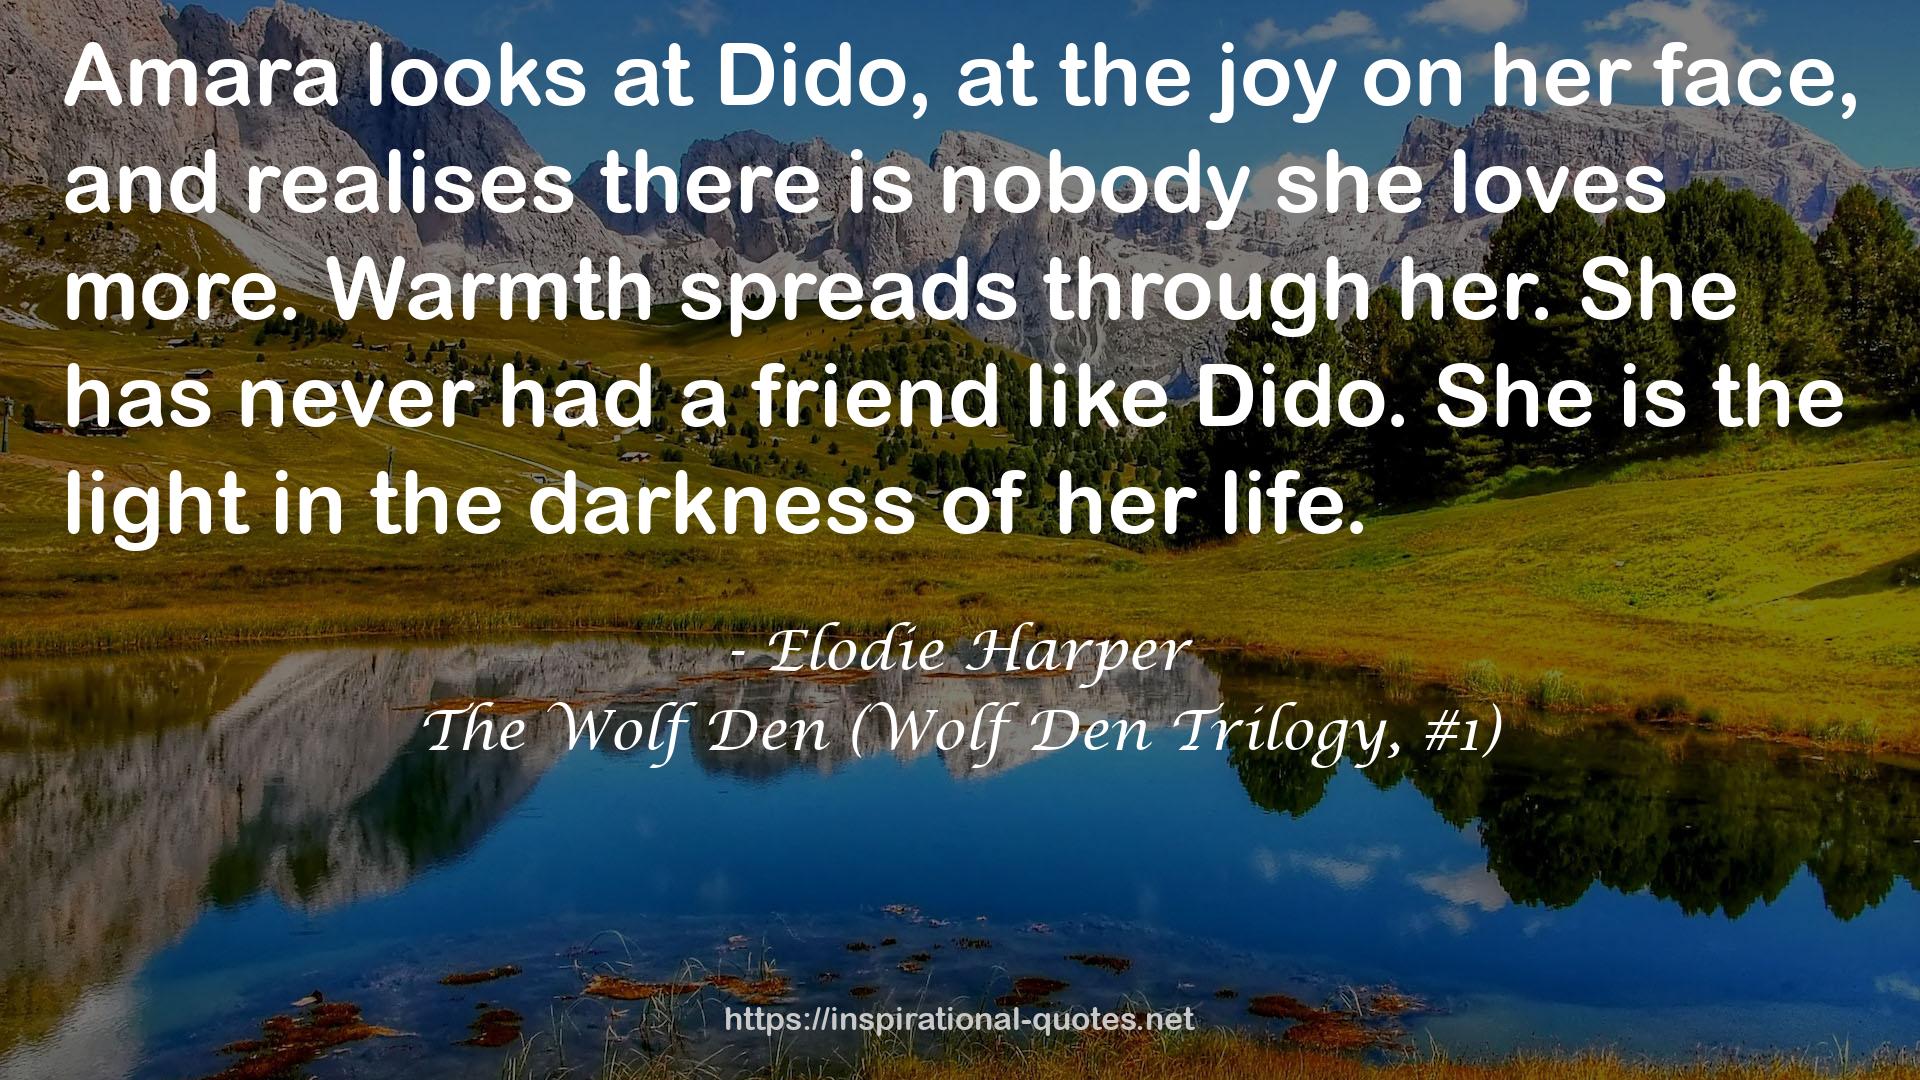 The Wolf Den (Wolf Den Trilogy, #1) QUOTES